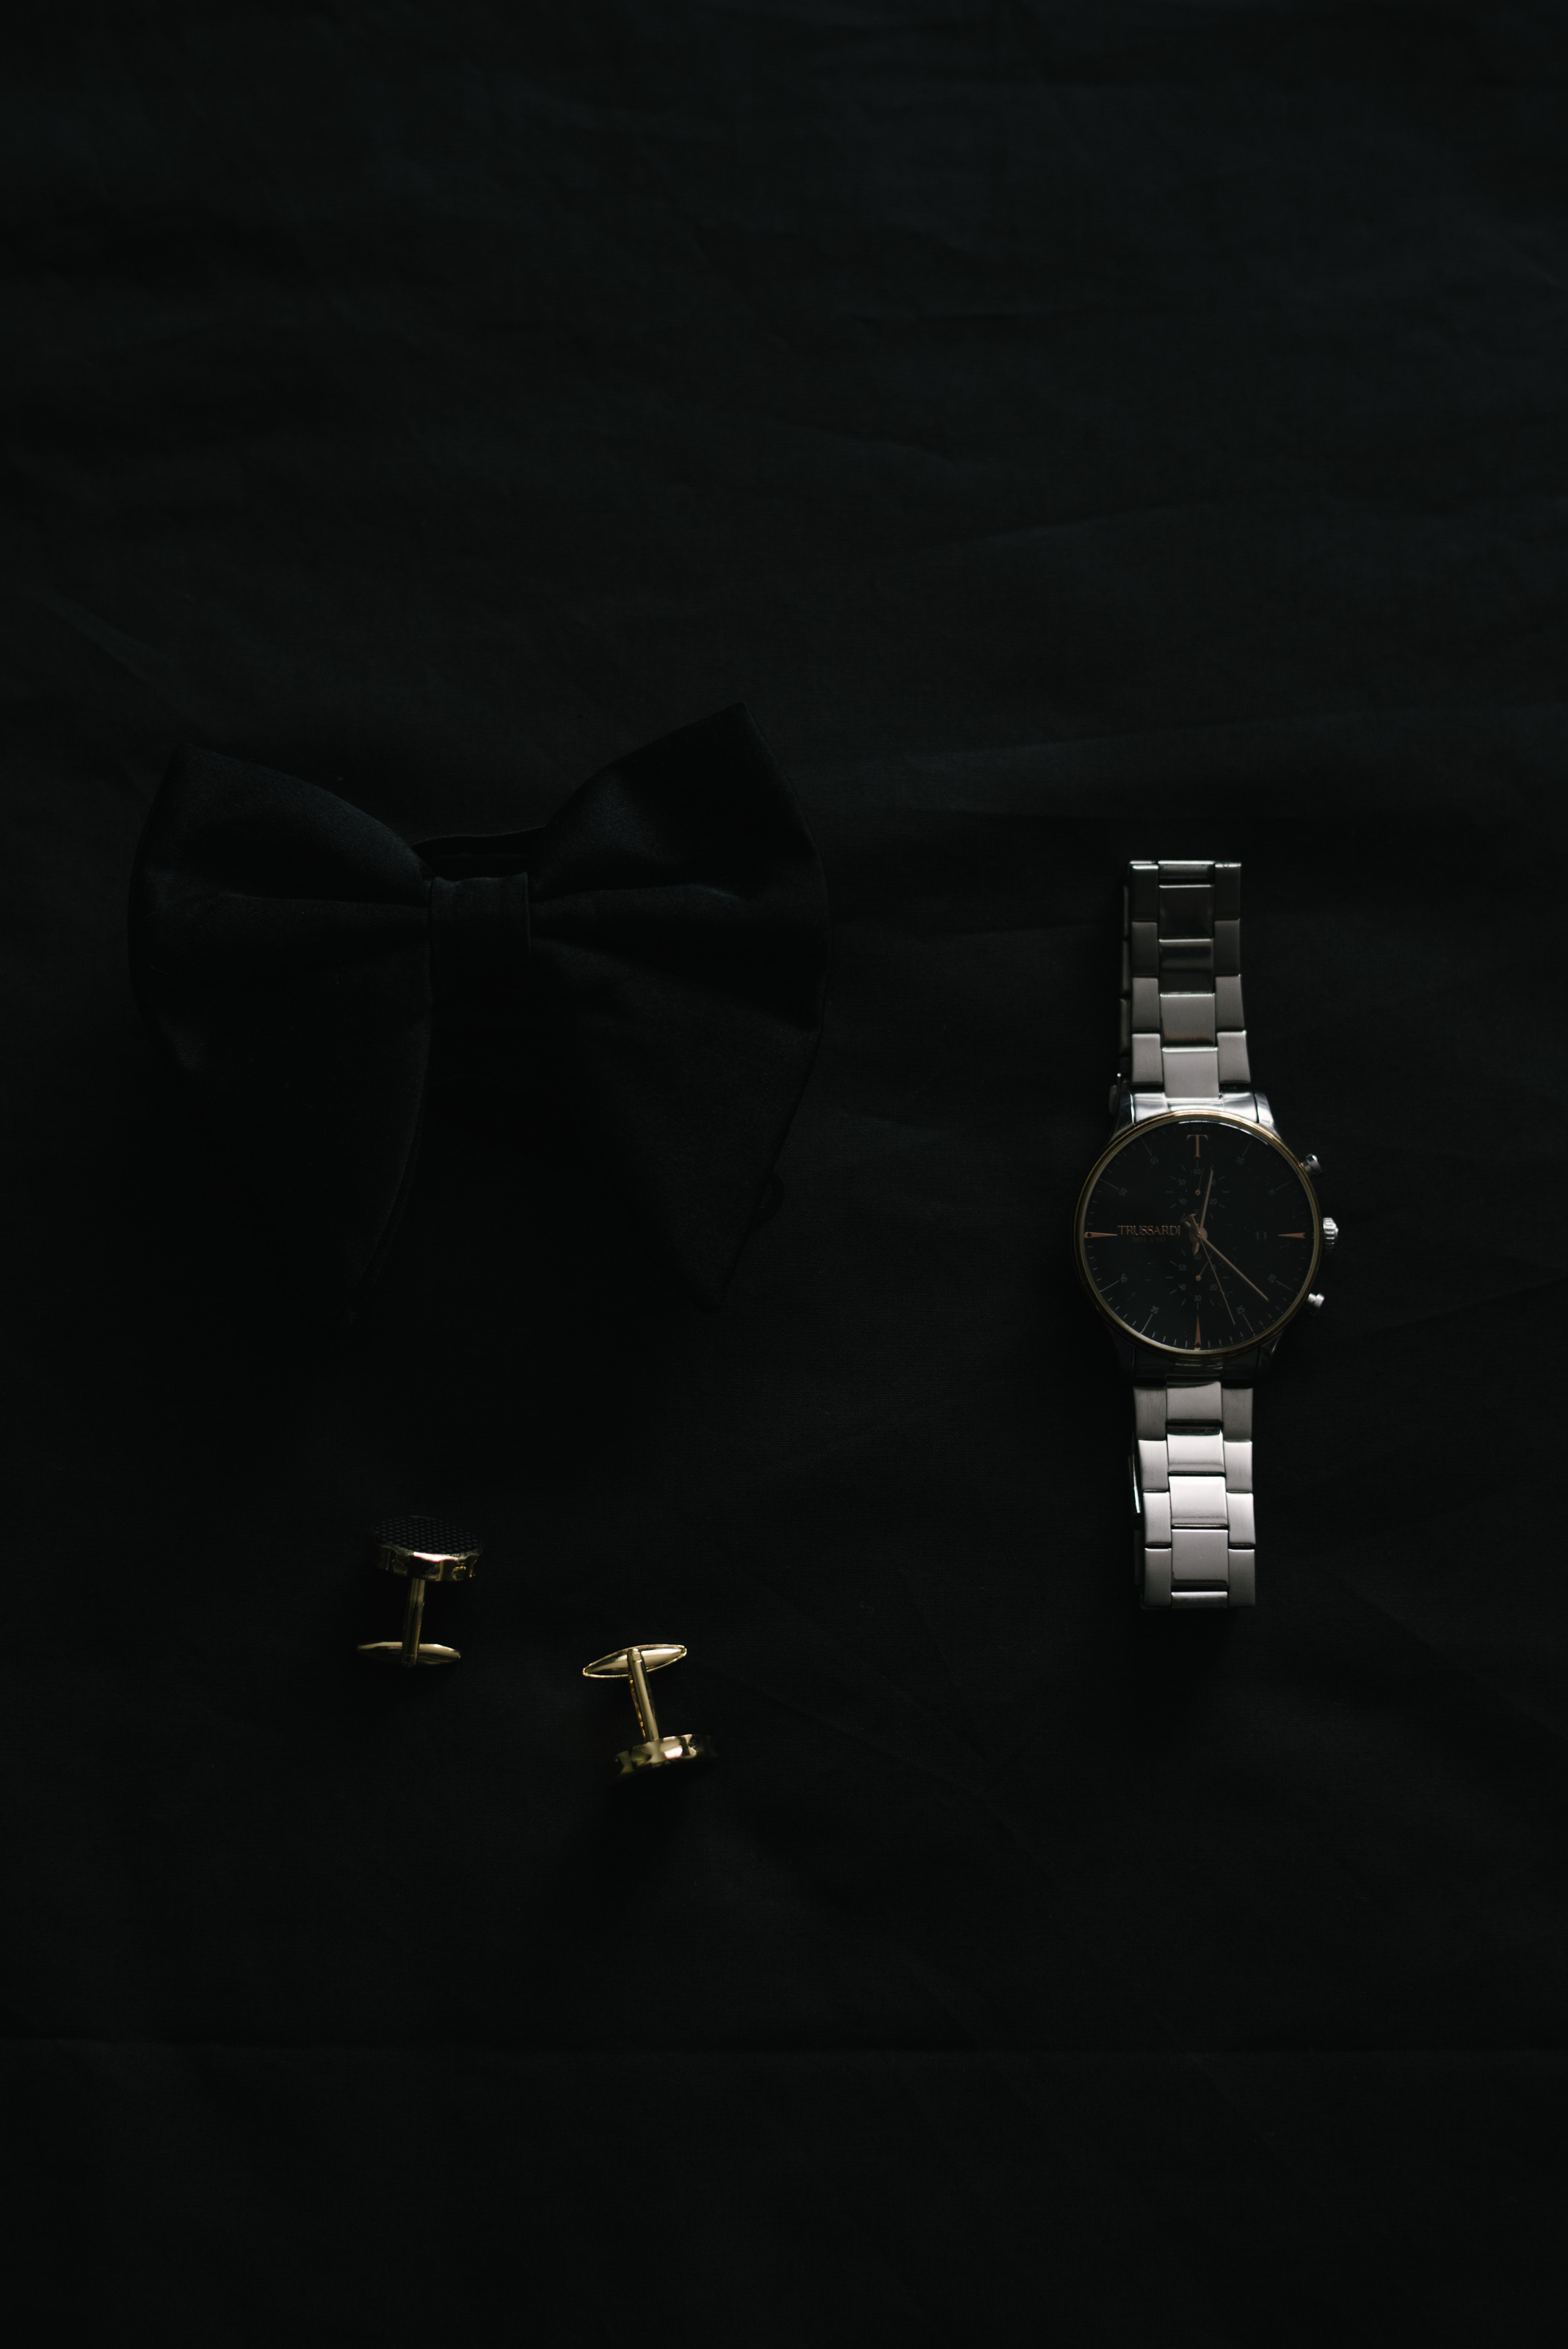 Groom watch and buttons